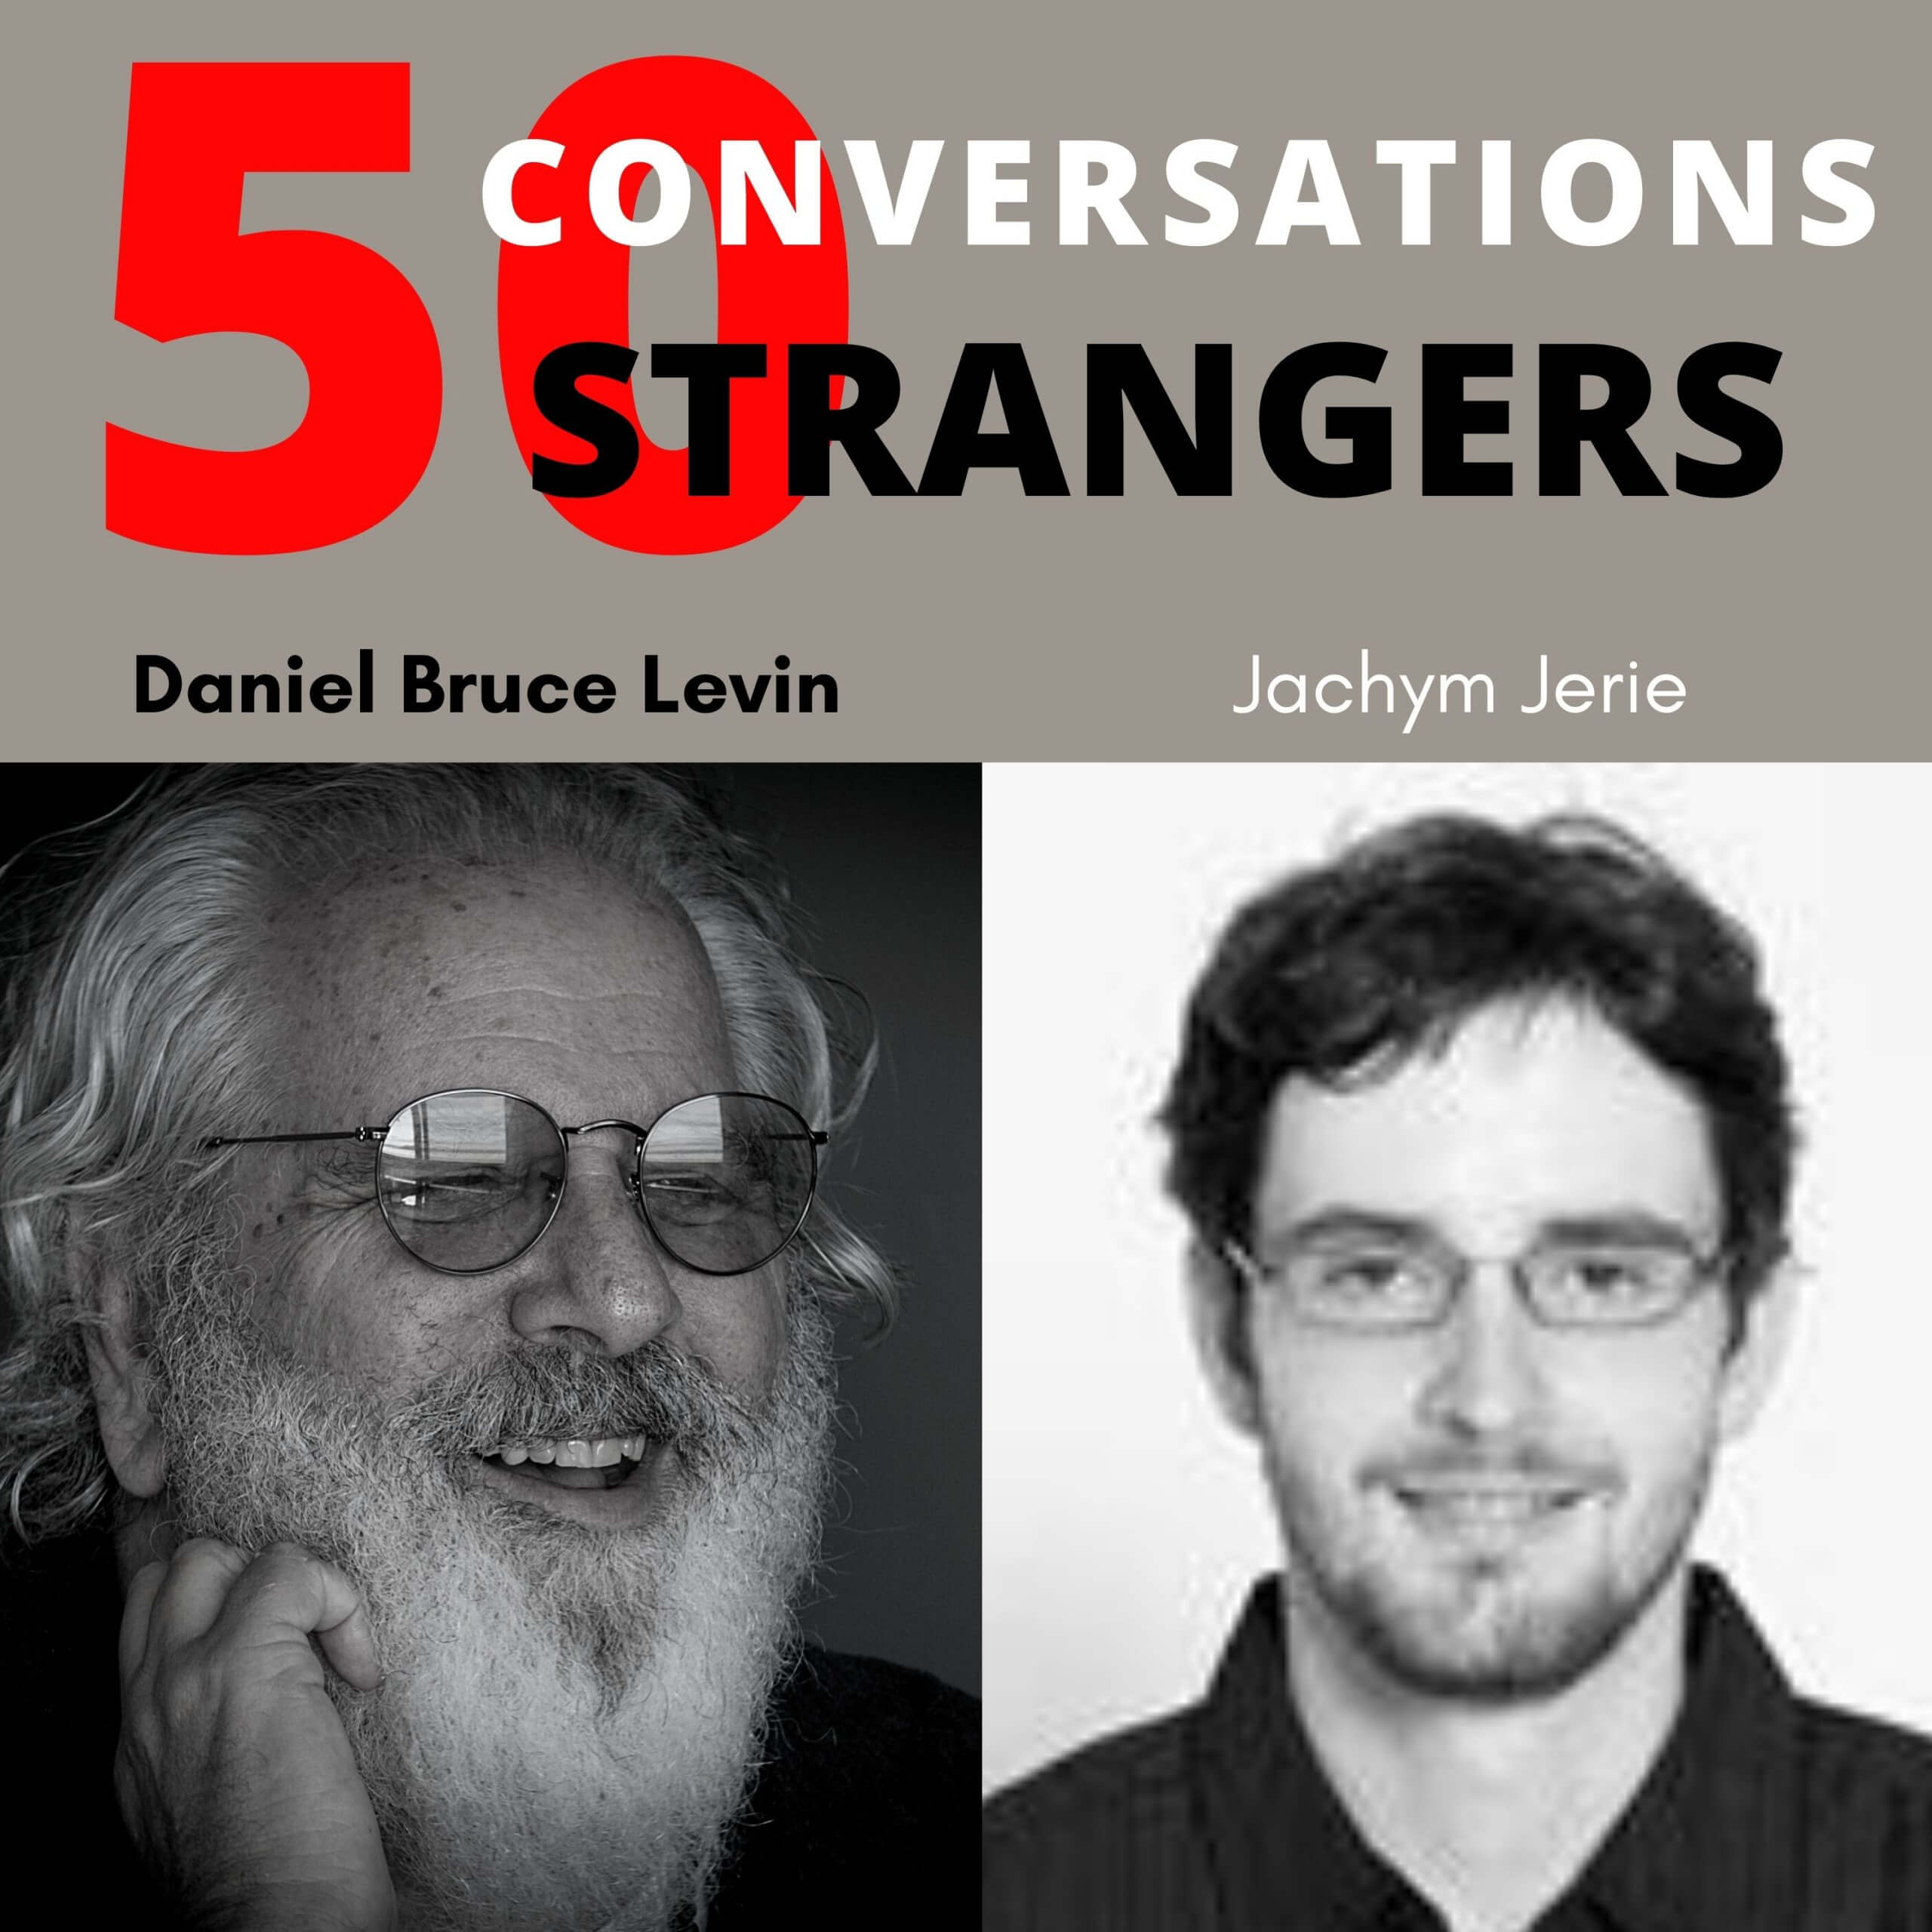 50 Conversations with 50 Strangers with Jachym Jerie